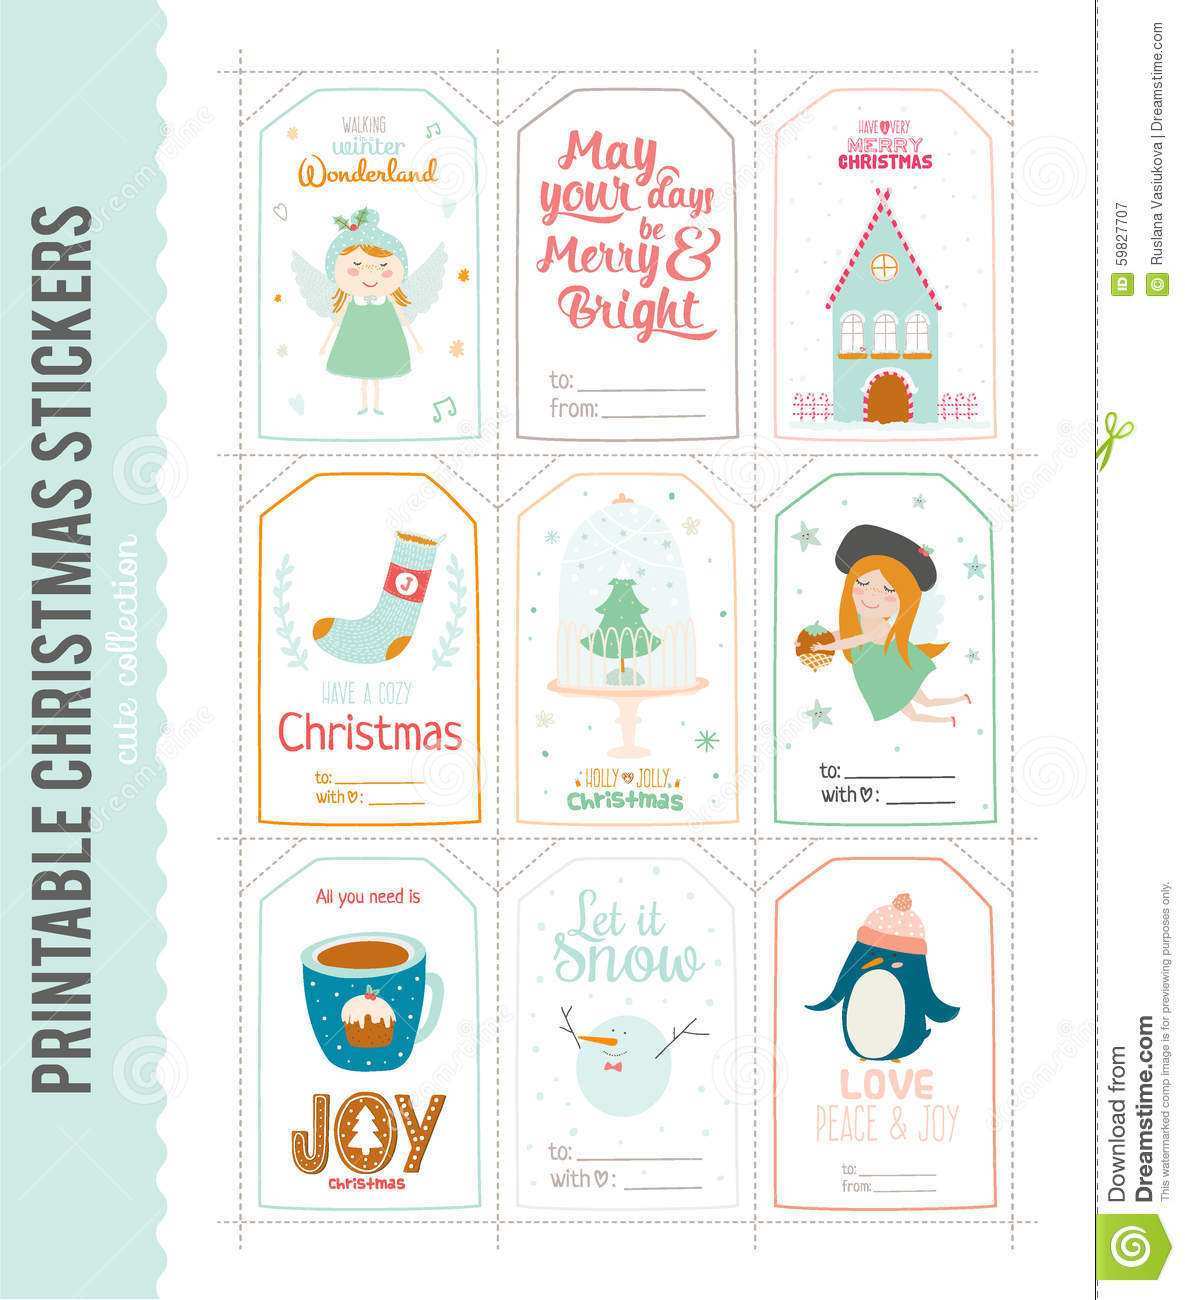 23 Adding Template For Christmas Card Labels With Stunning Design with Template For Christmas Card Labels